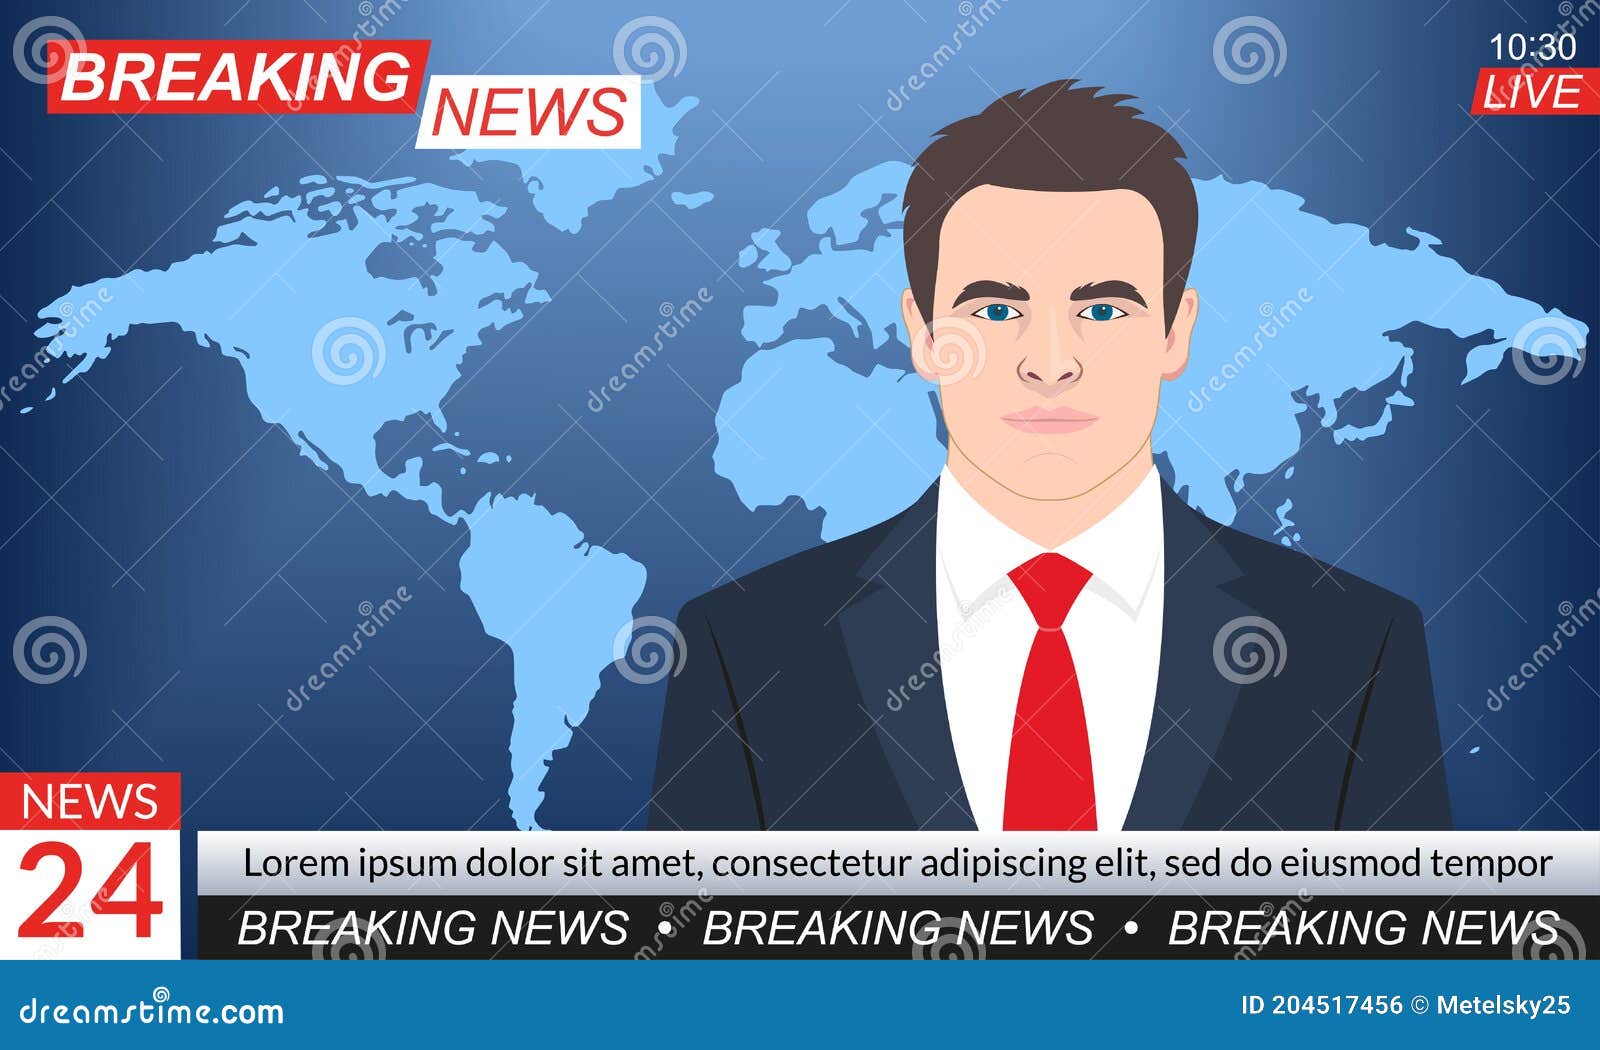 TV News Studio. Breaking News Background with Anchorman or Presenter.  Television Program Template Stock Vector - Illustration of breaking, live:  204517456